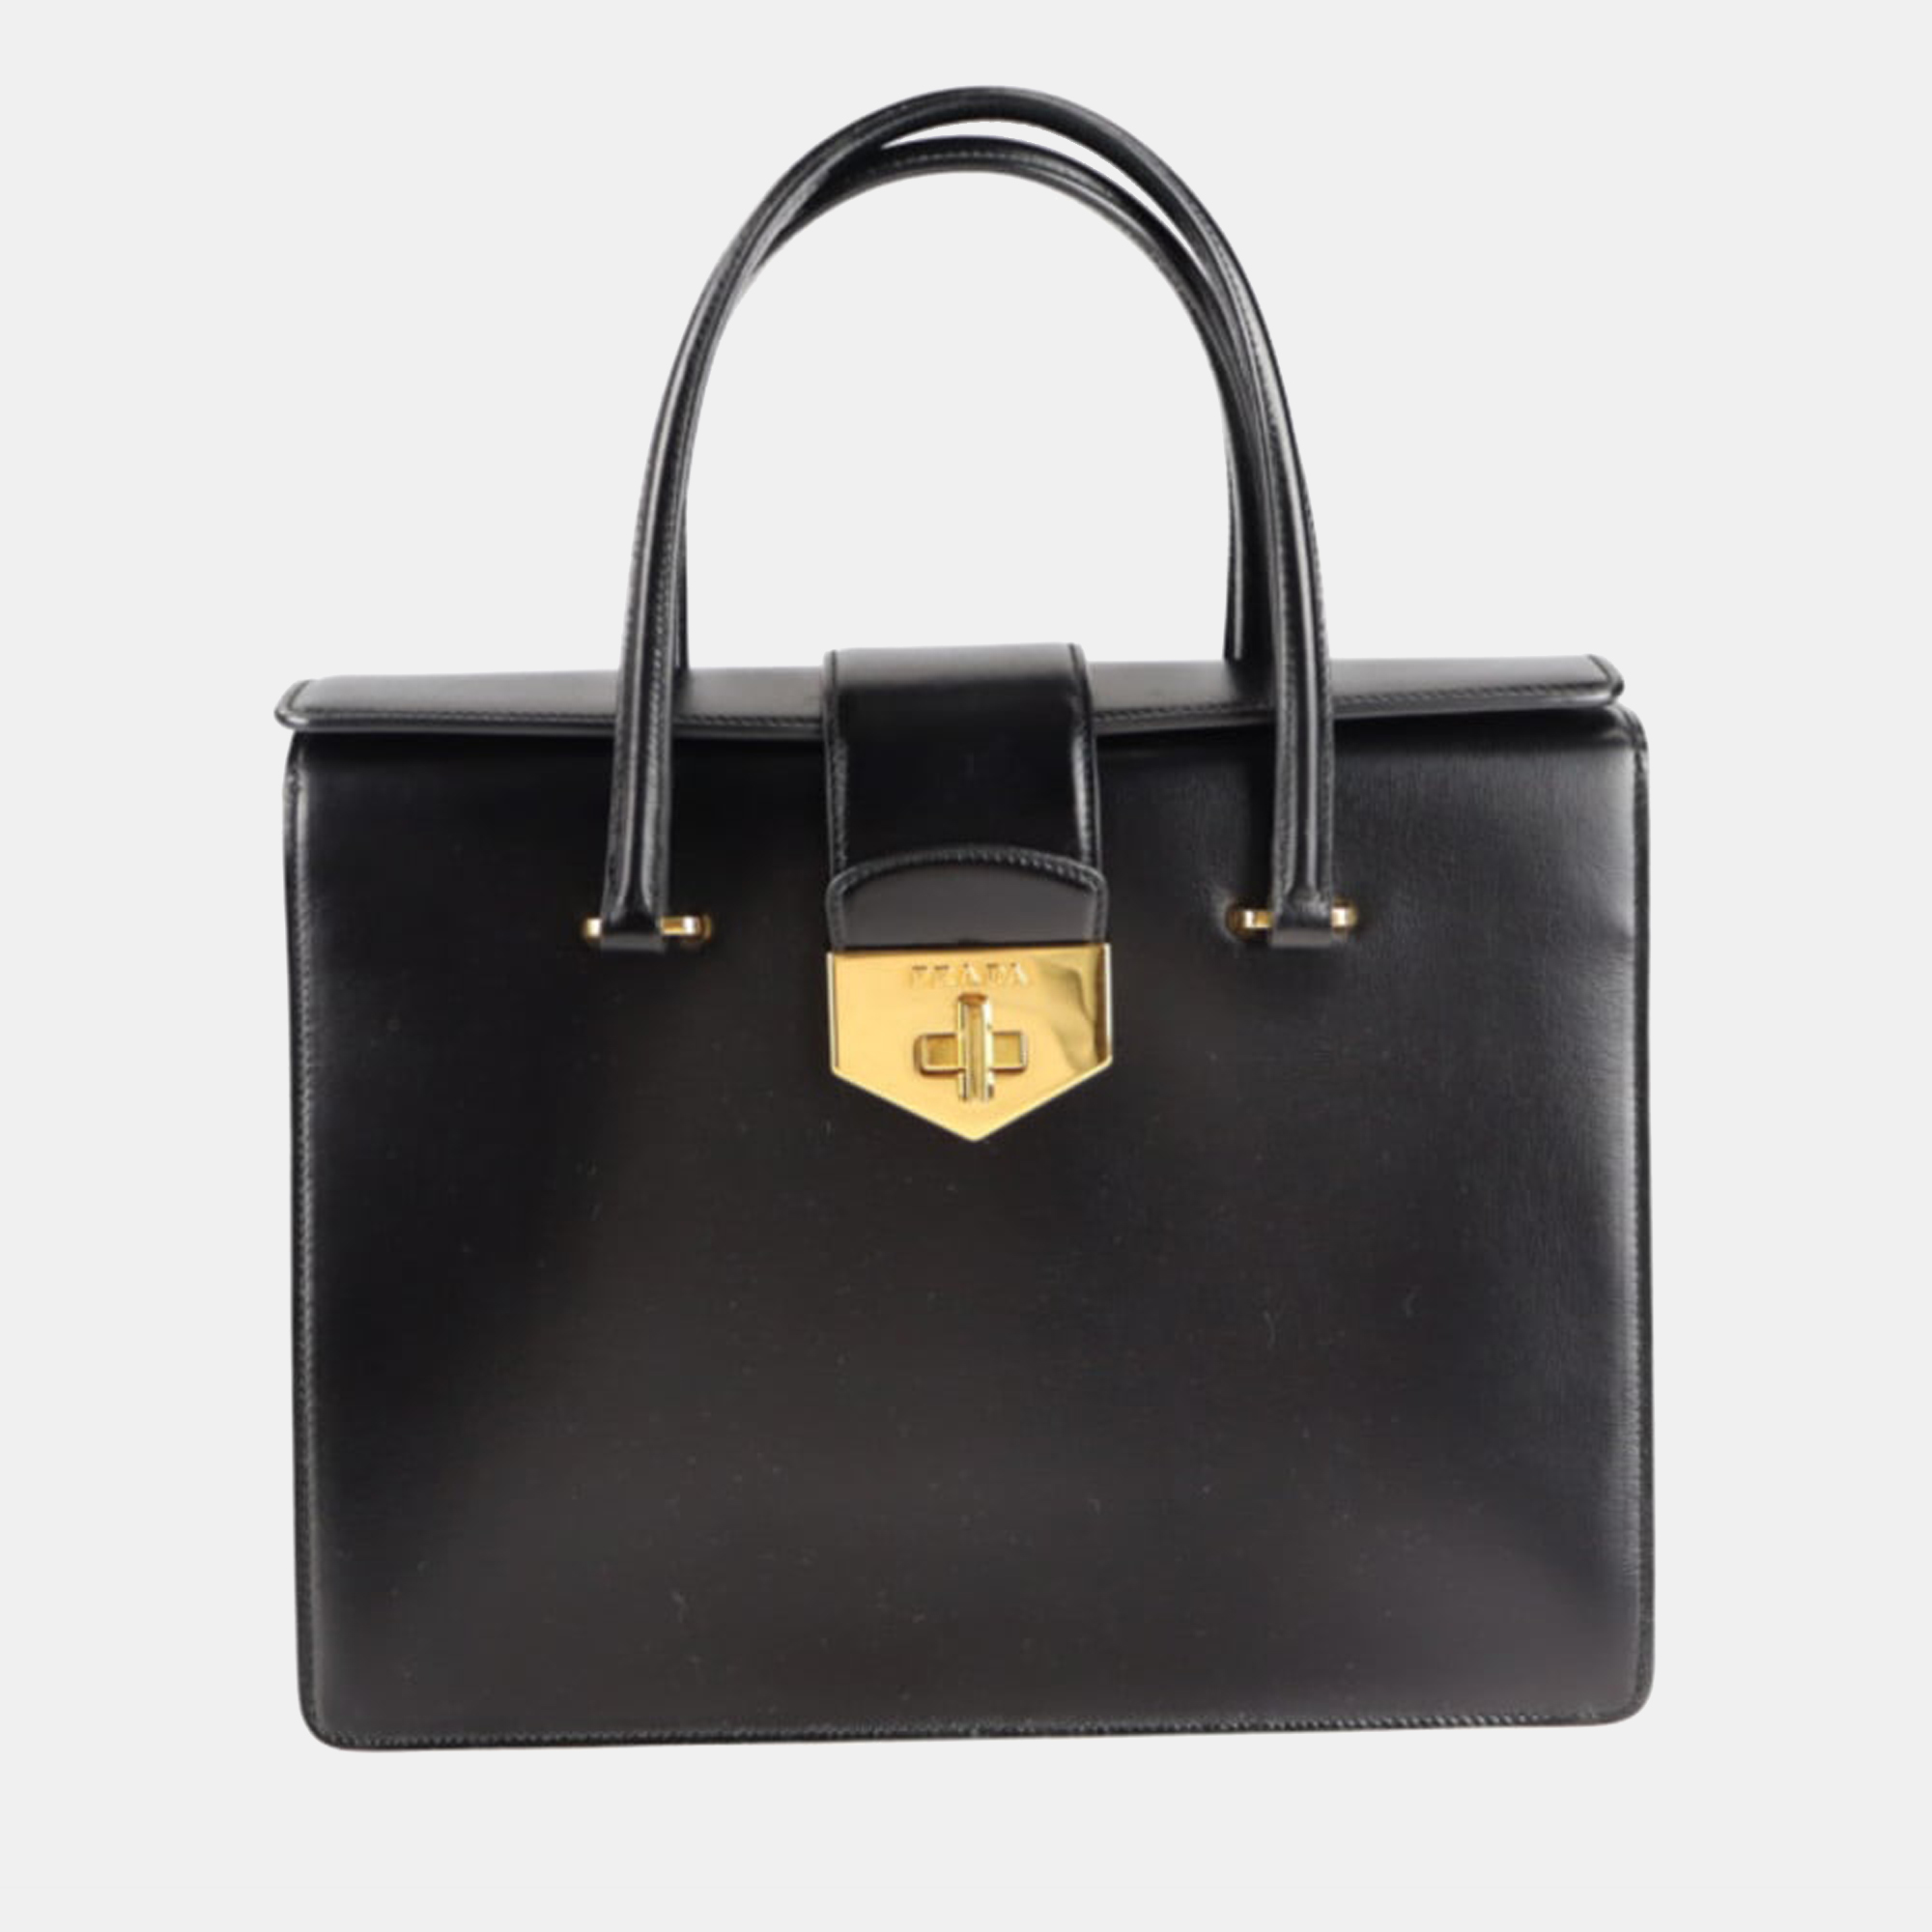 Marked by flawless craftsmanship and enduring appeal this designer bag is bound to be a versatile and durable accessory. It has a practical size.